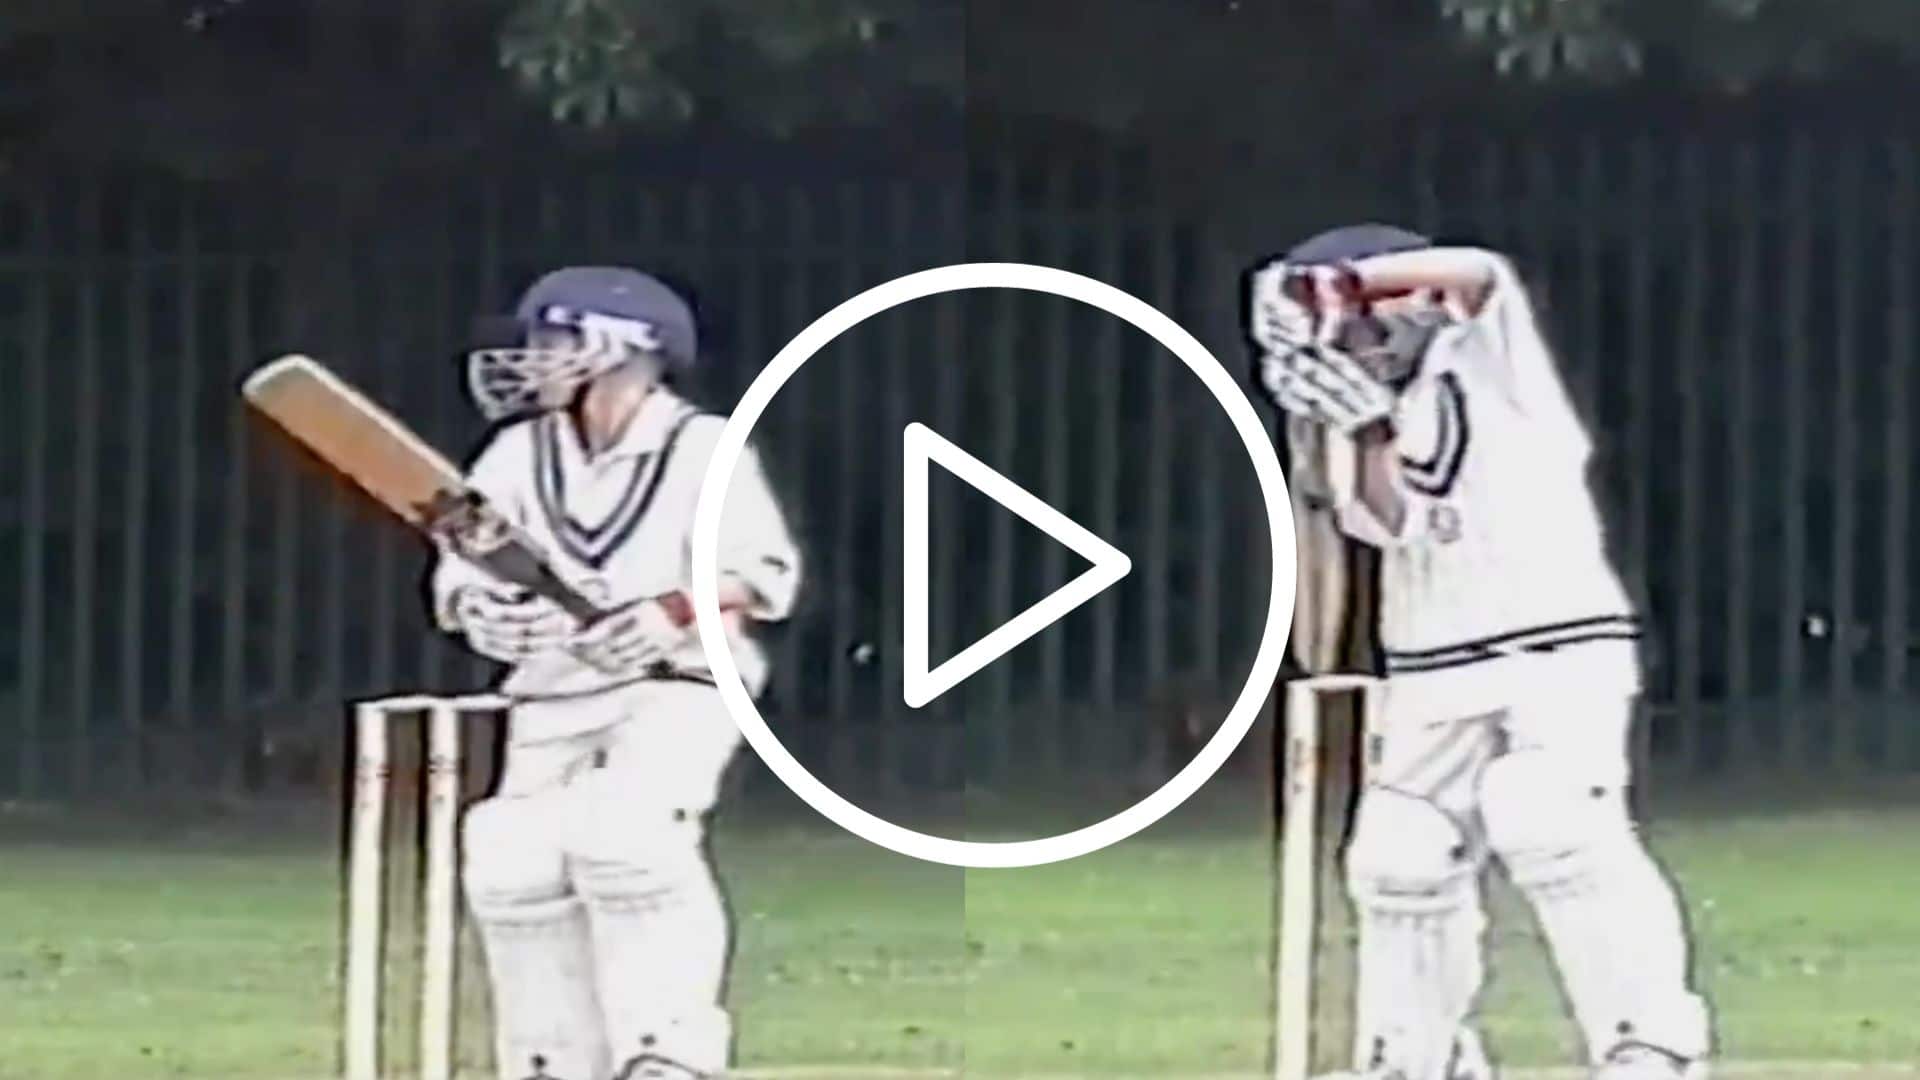 [Watch] Joe Root's Childhood Cricket Video- Revealing His Classic Style Even As A Kid